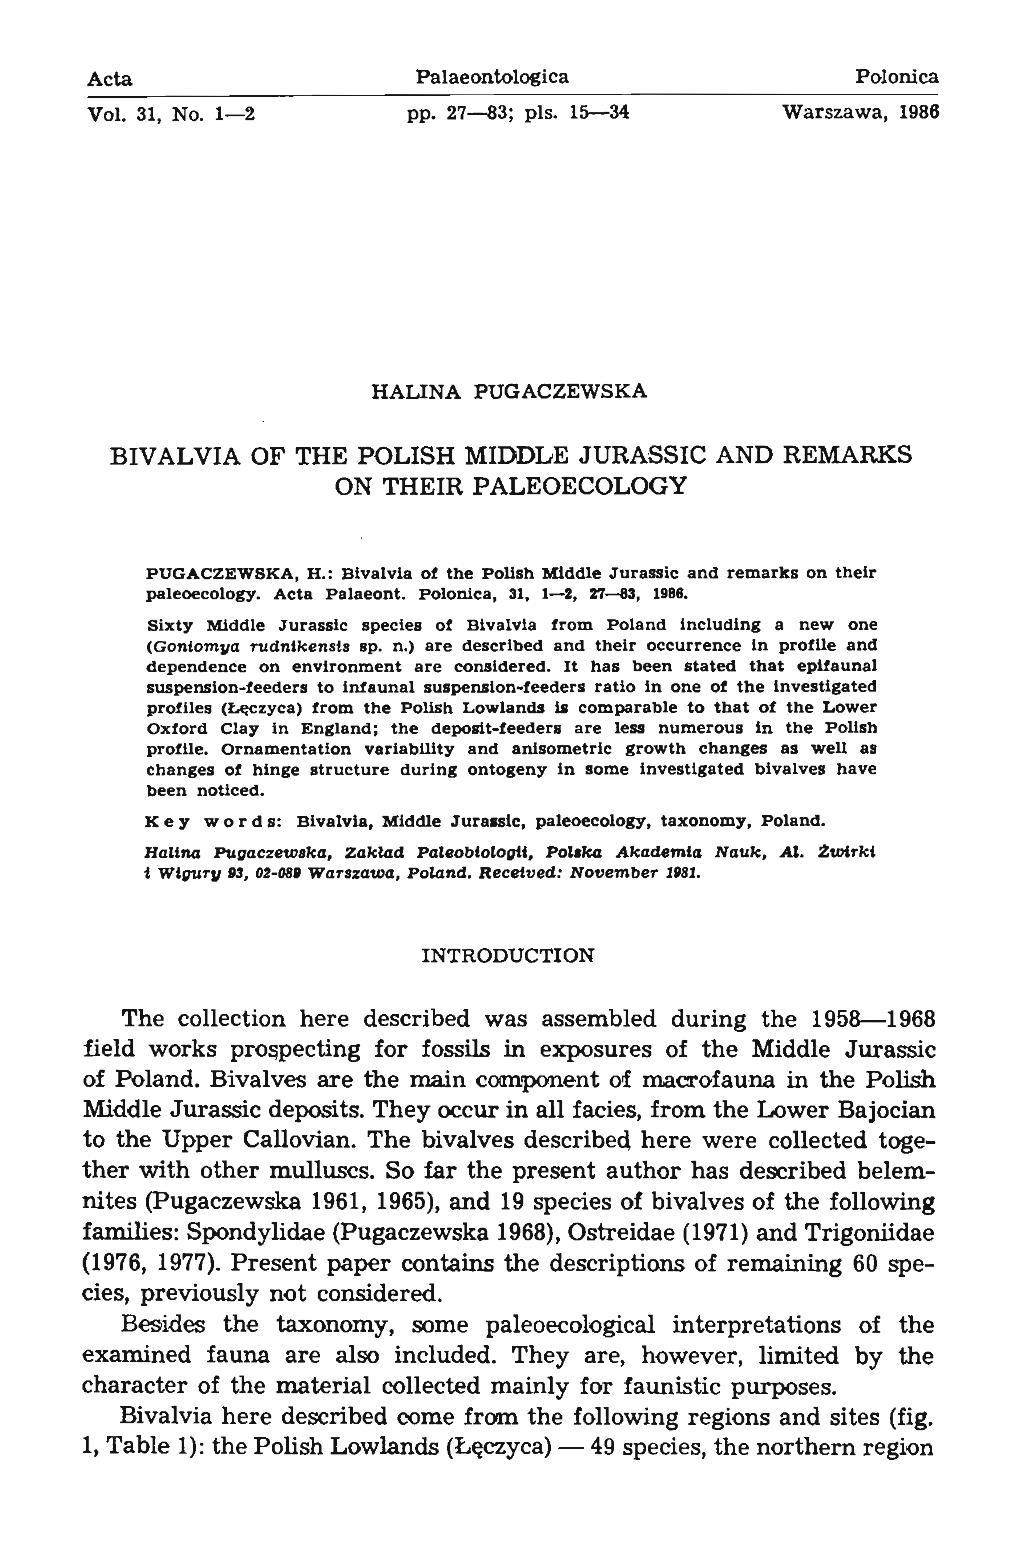 BIVALVIA of the POLISH MIDDLE JURASSIC and REMARKS on THEIR PALEOECOLOGY the Collection Here Described Was Assembled During